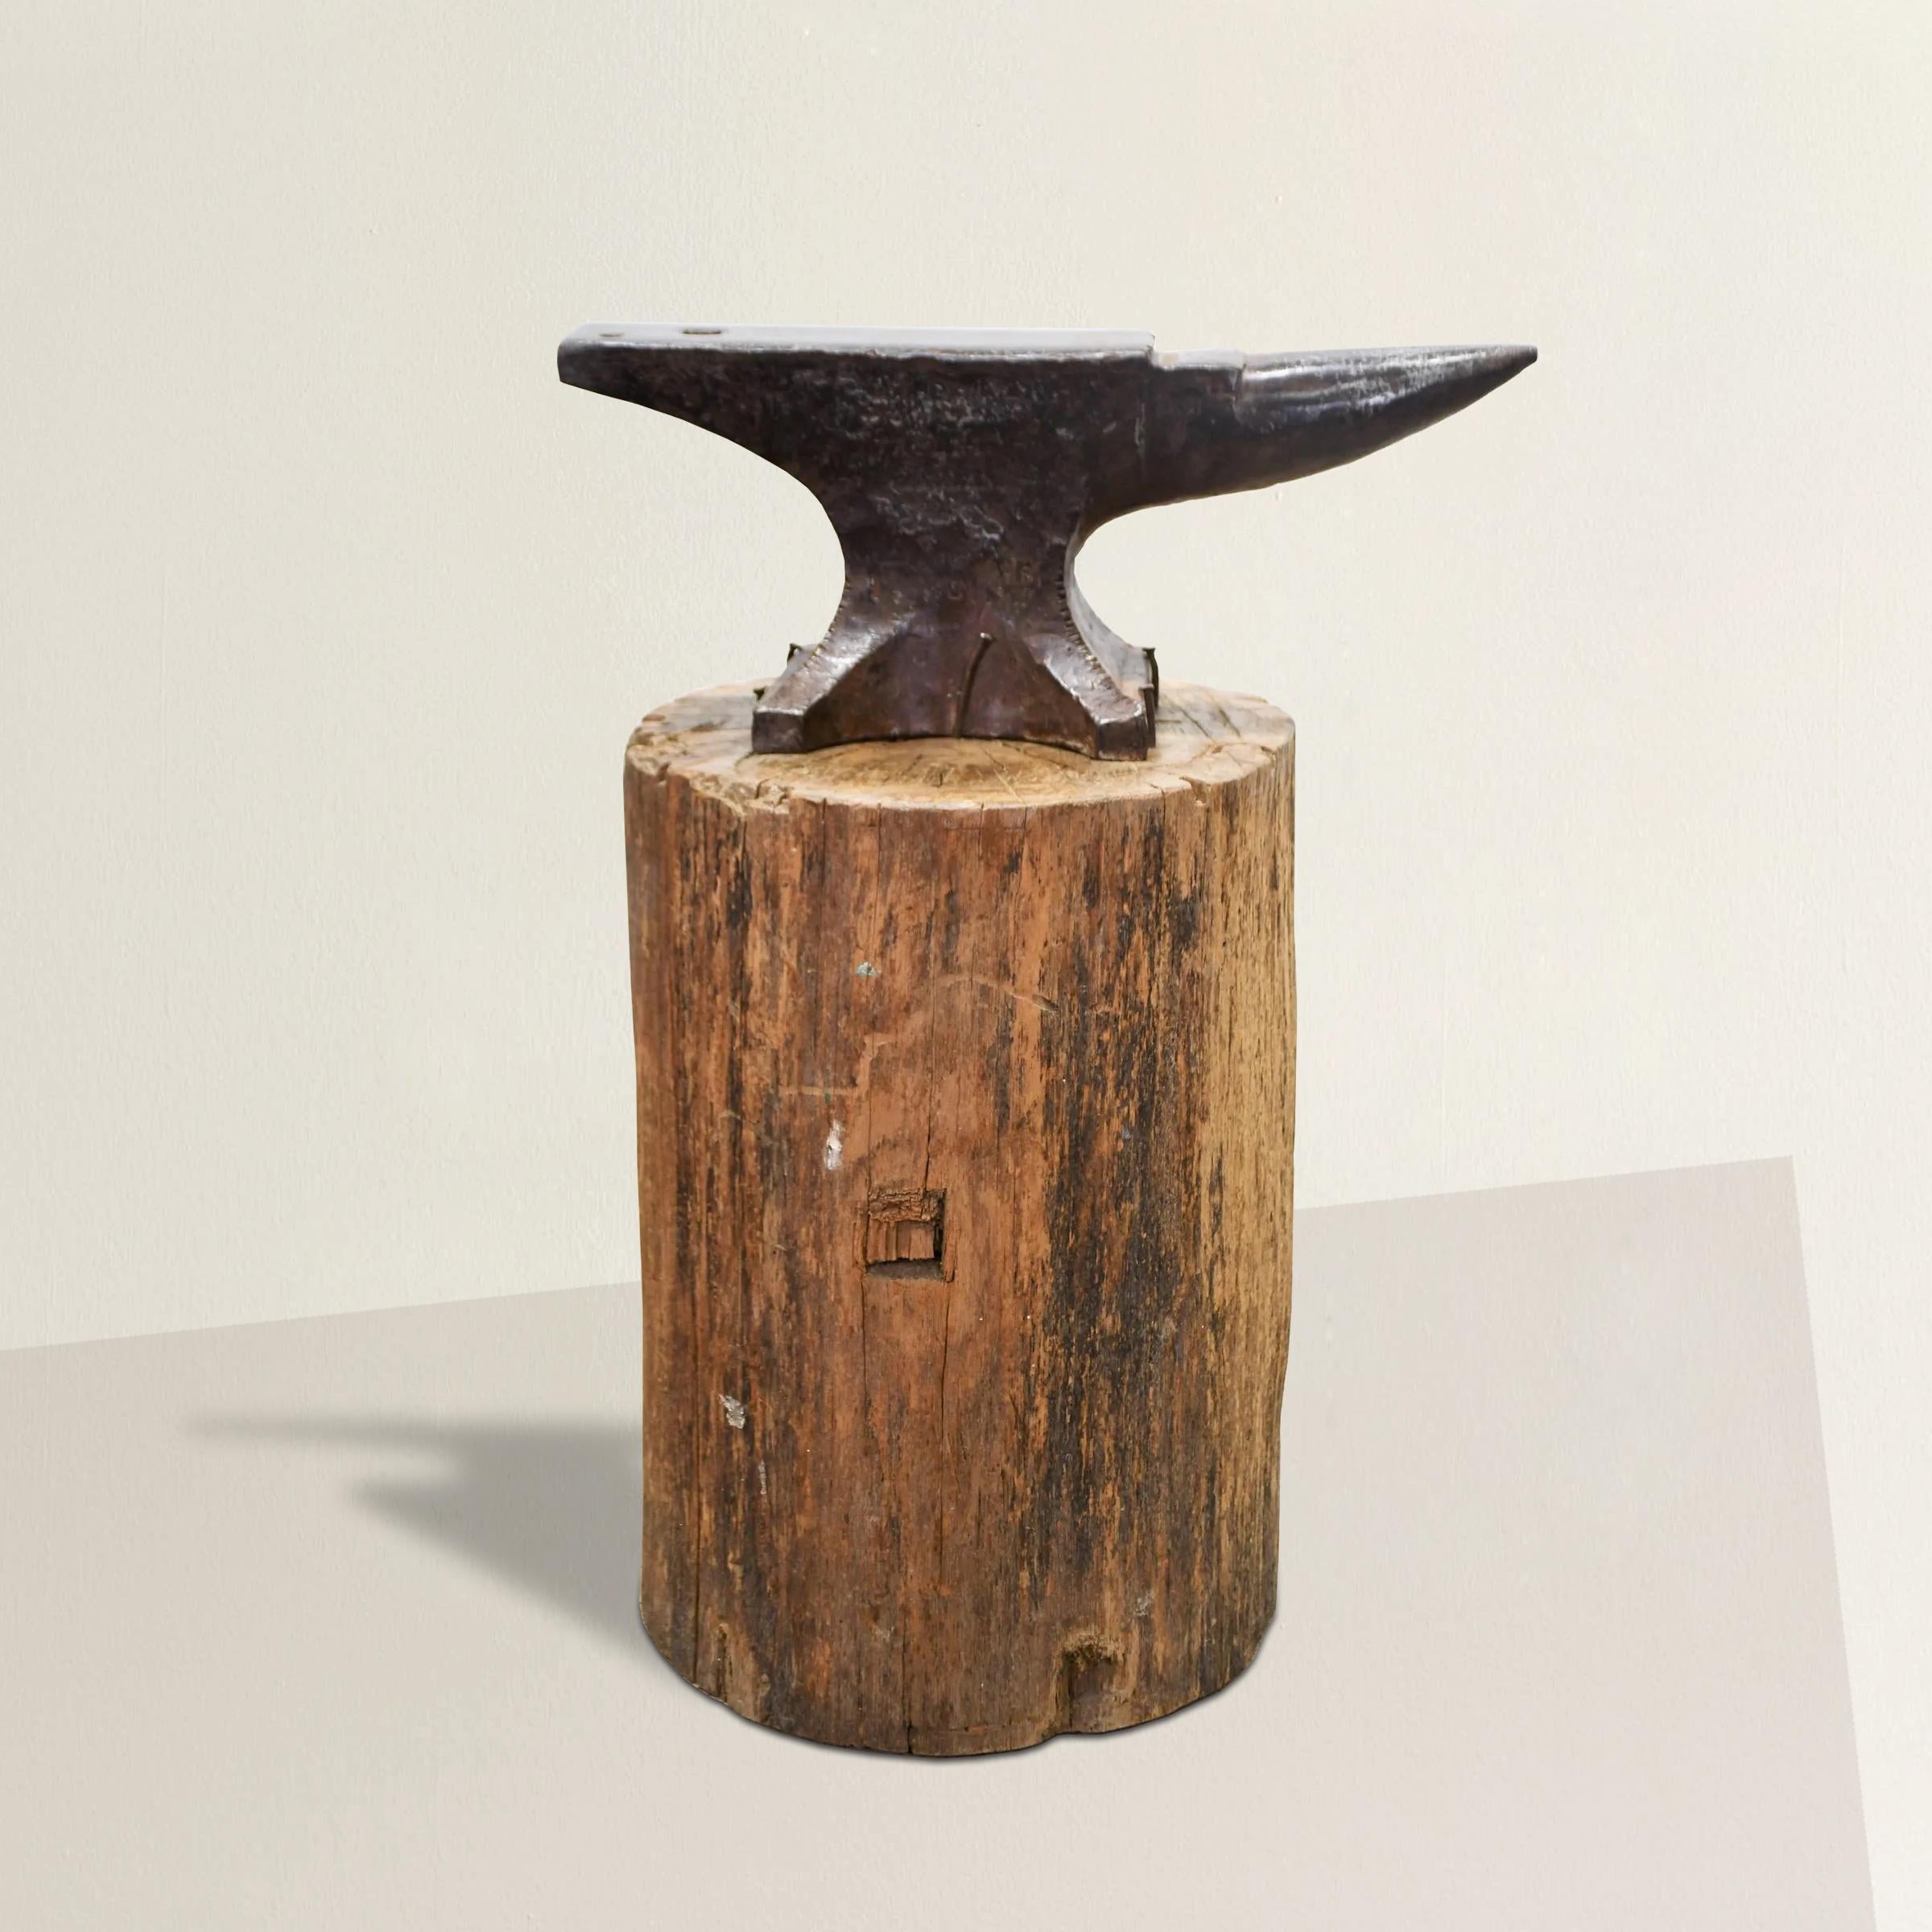 A striking 19th century American Blacksmith's iron anvil mounted with nails to it's original tree stump base. The anvil is attached to the stump with several hand-made nails. What a perfect piece of American folk art!